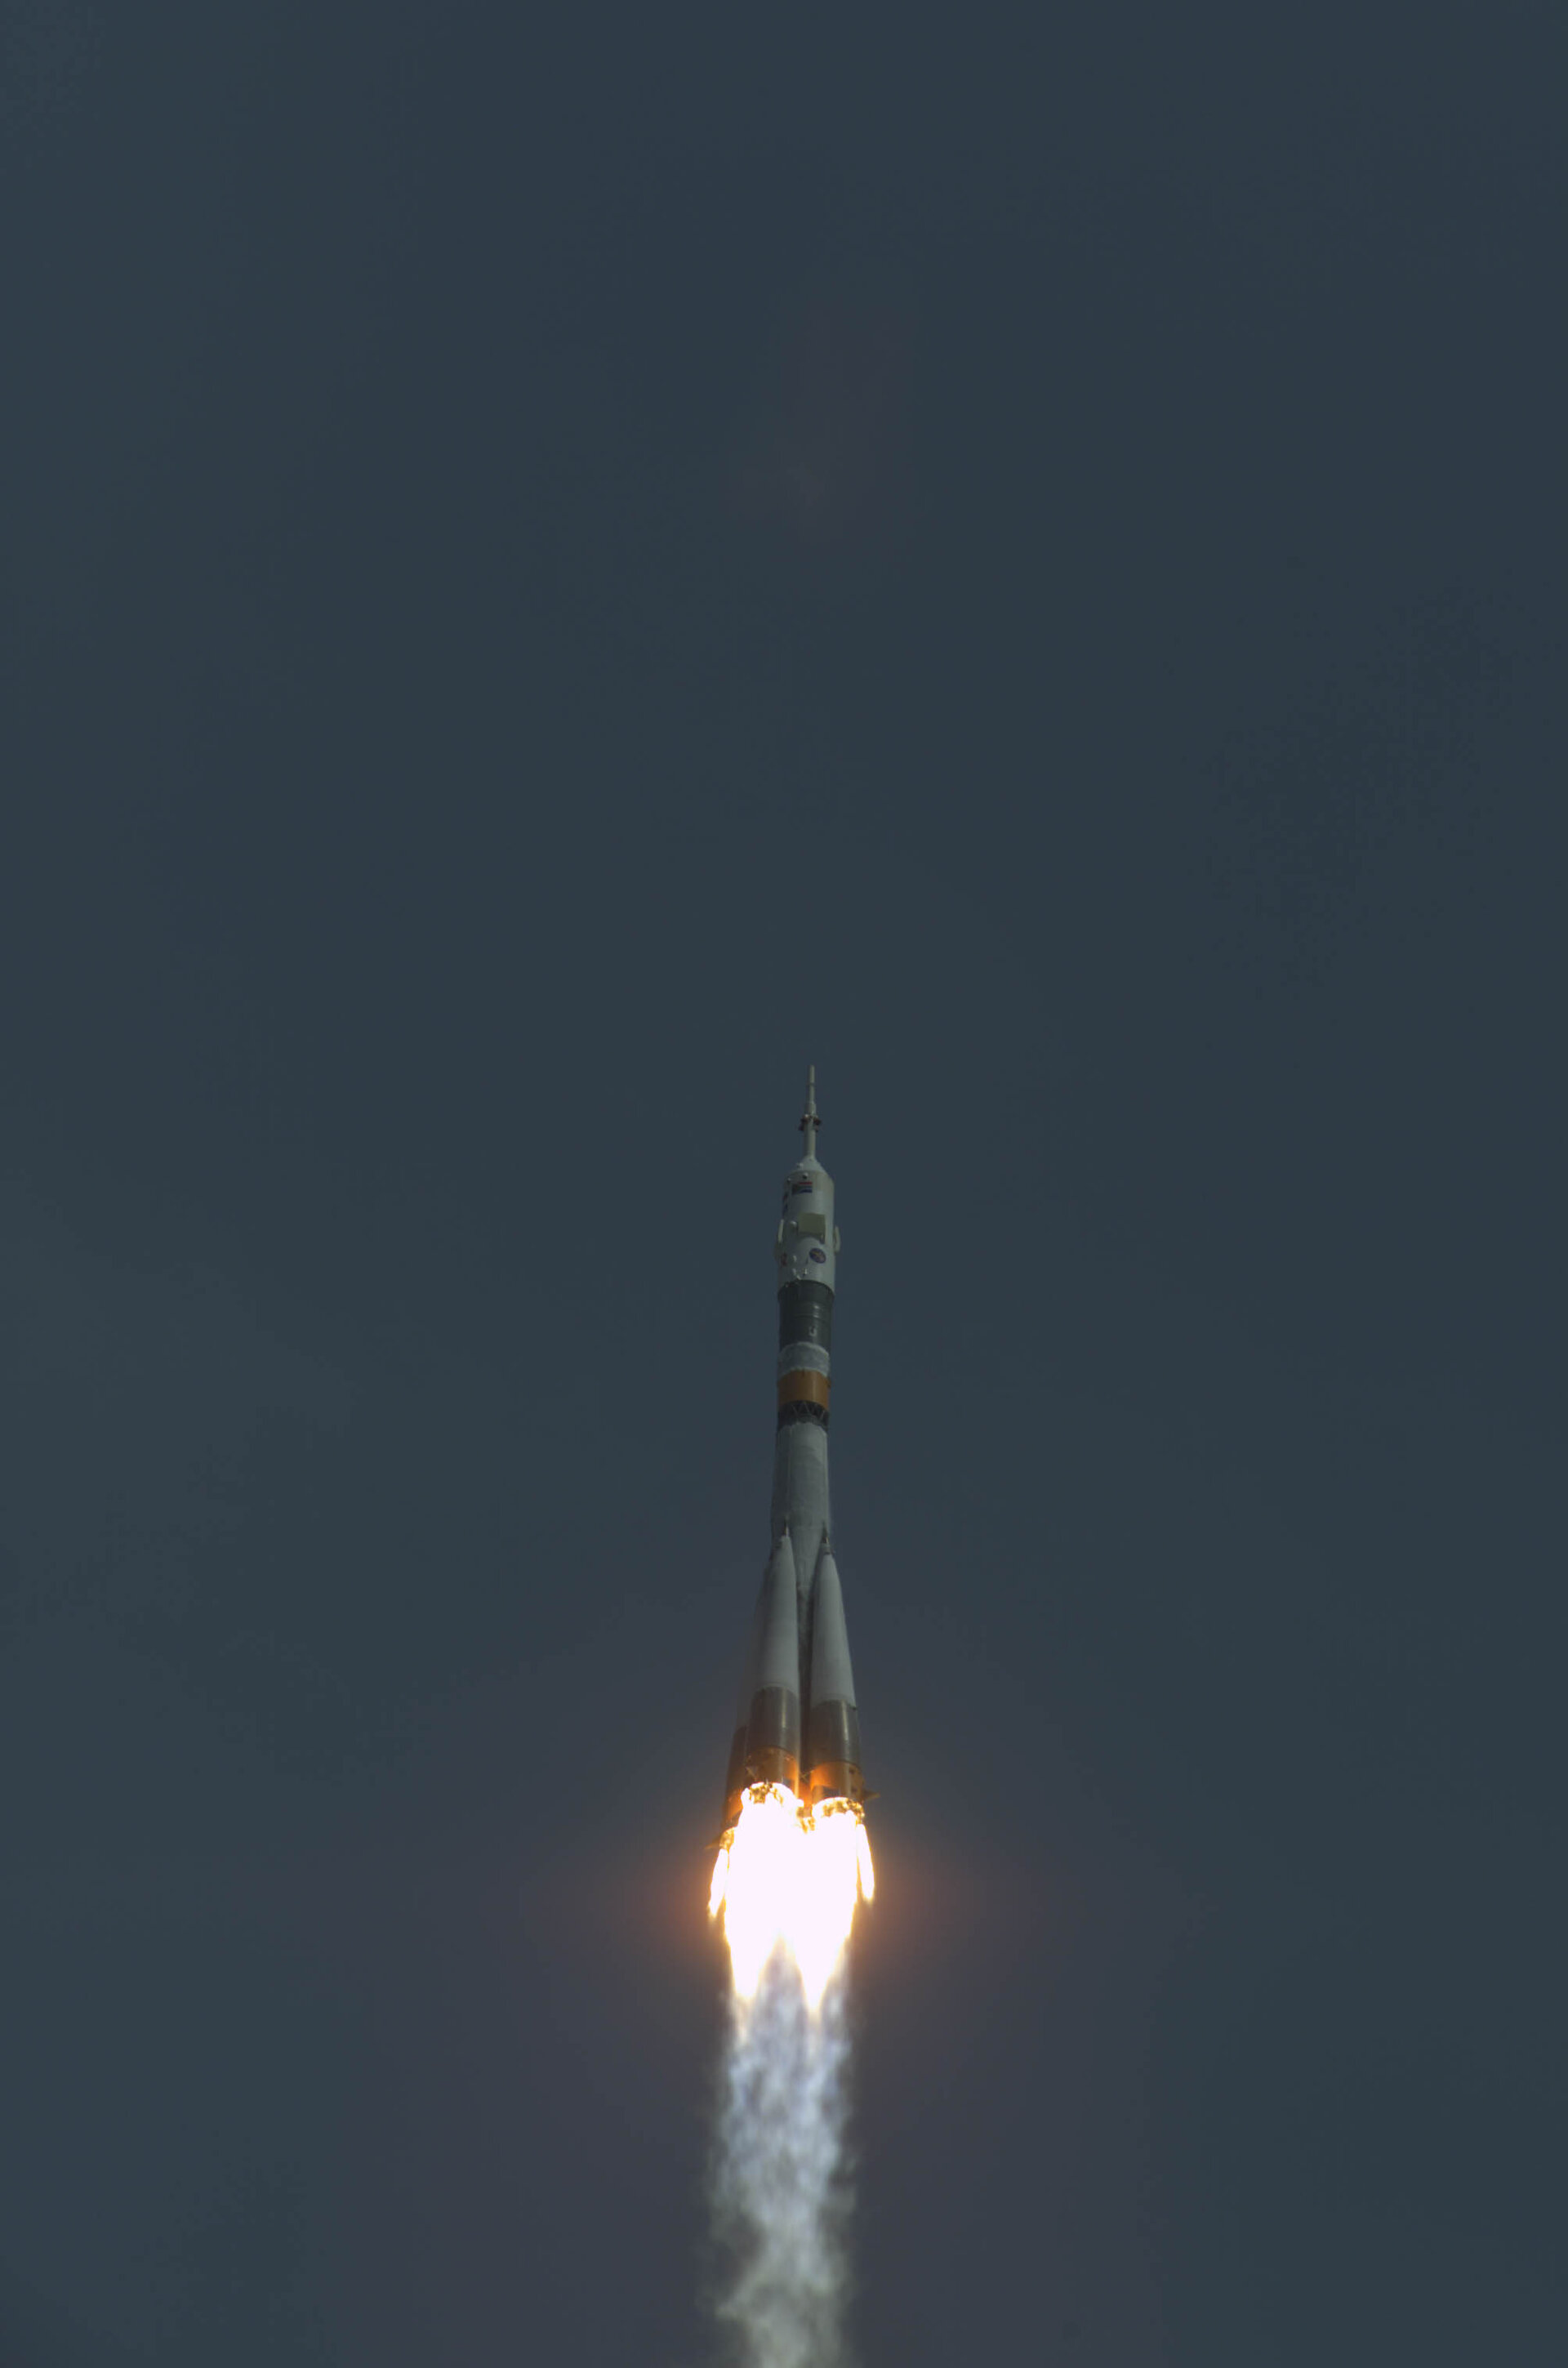 A successful launch for the Marco Polo mission